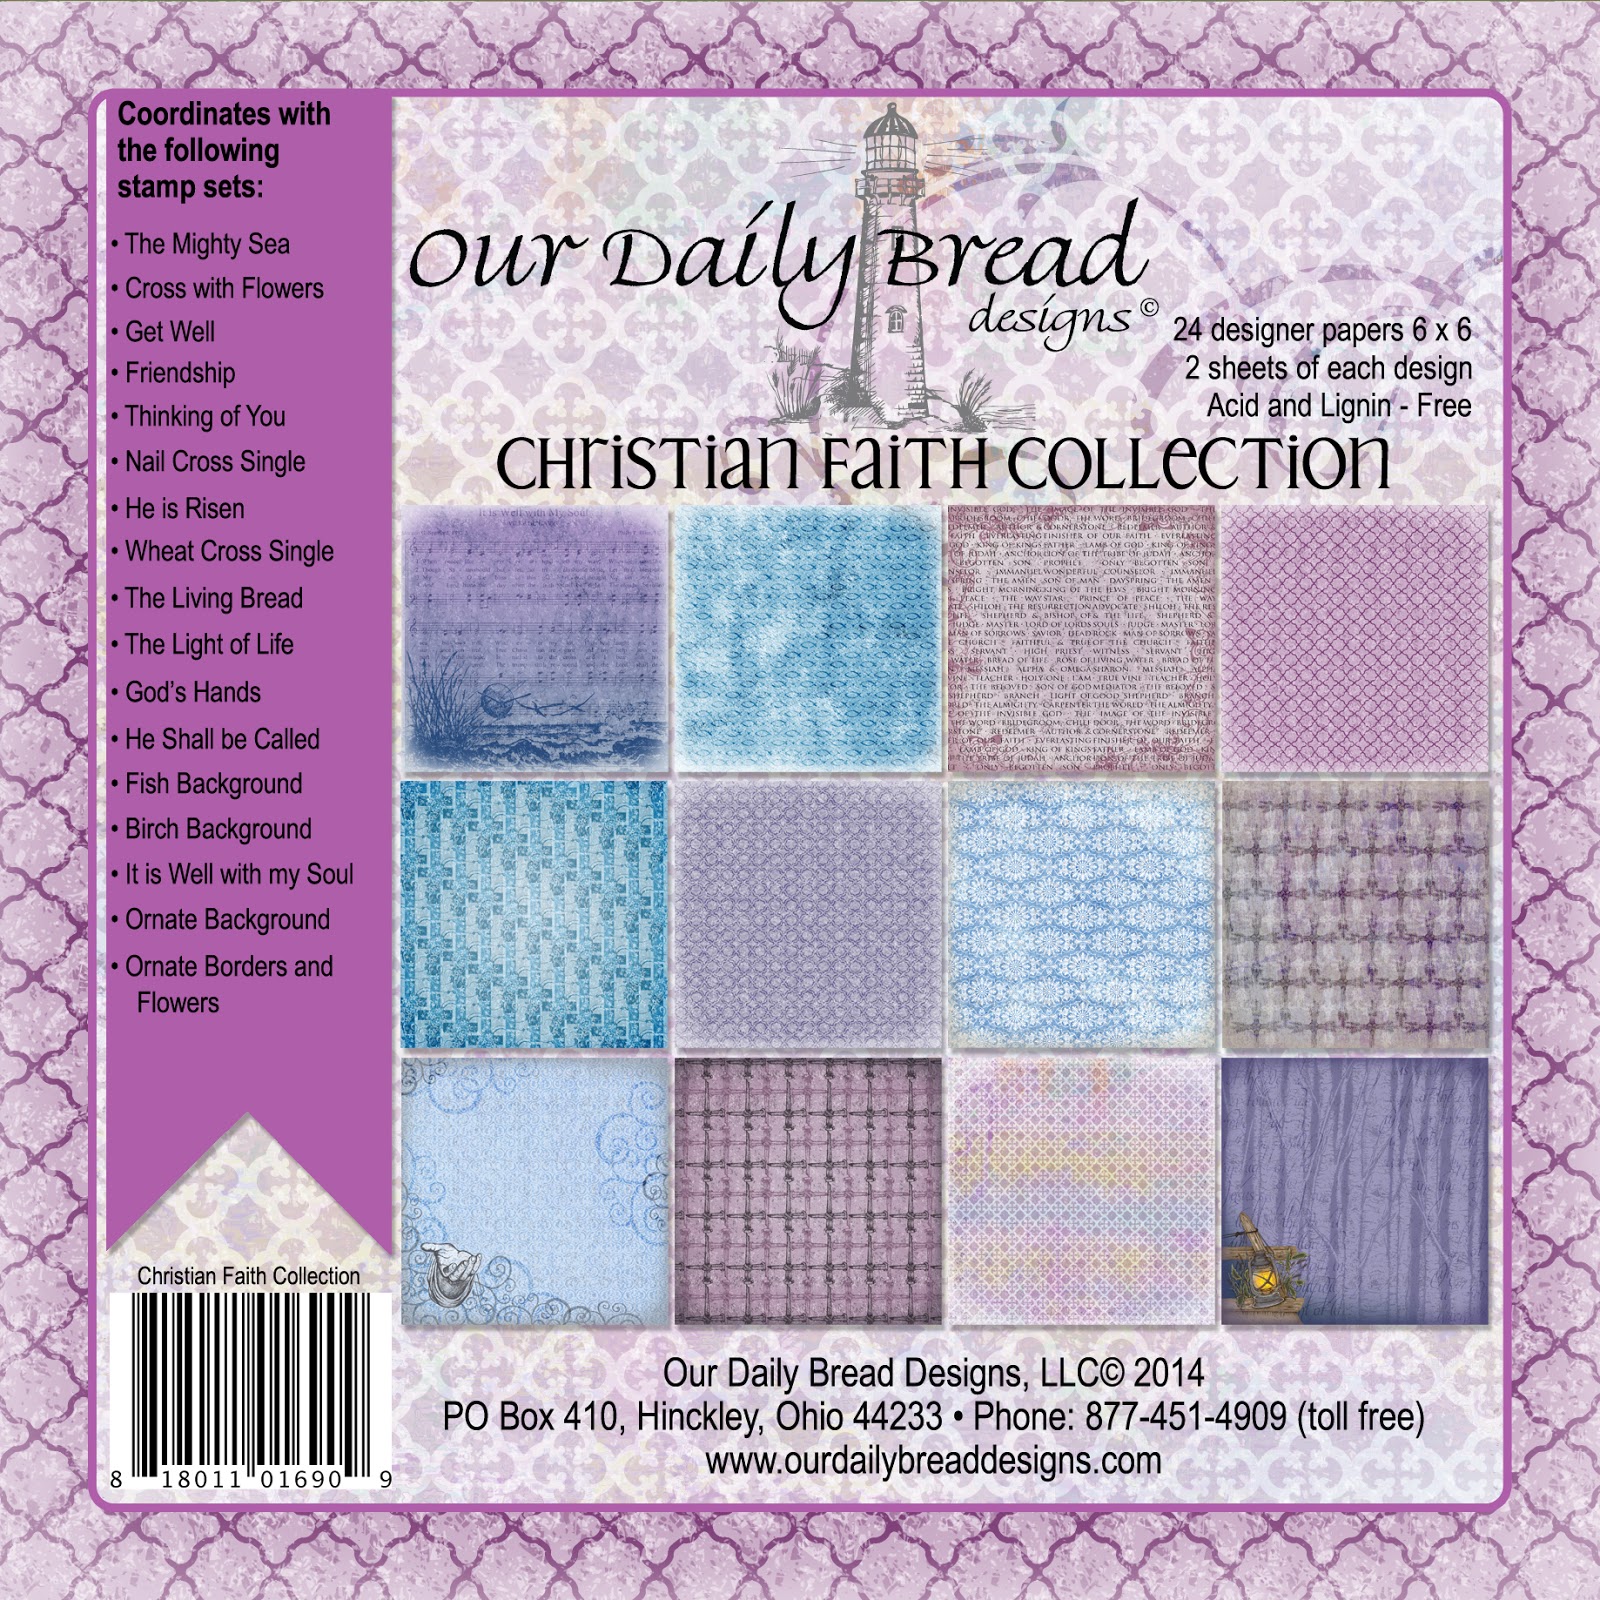 http://www.ourdailybreaddesigns.com/index.php/christian-faith-collection-6x6-paper-pad.html